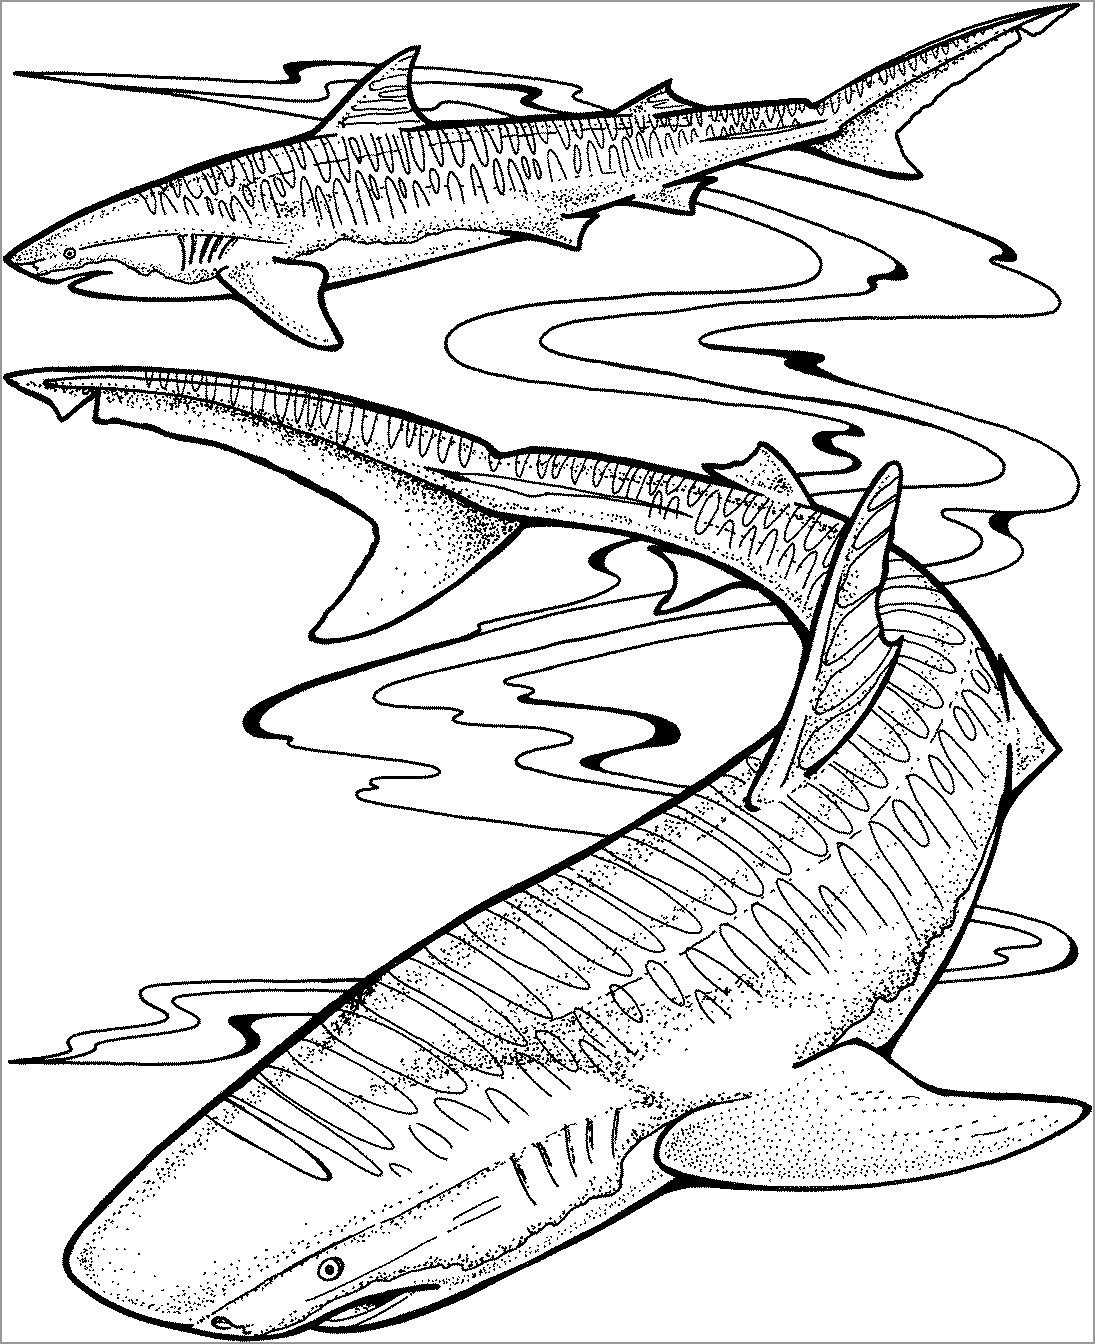 Shark Coloring Pages Coloringbay